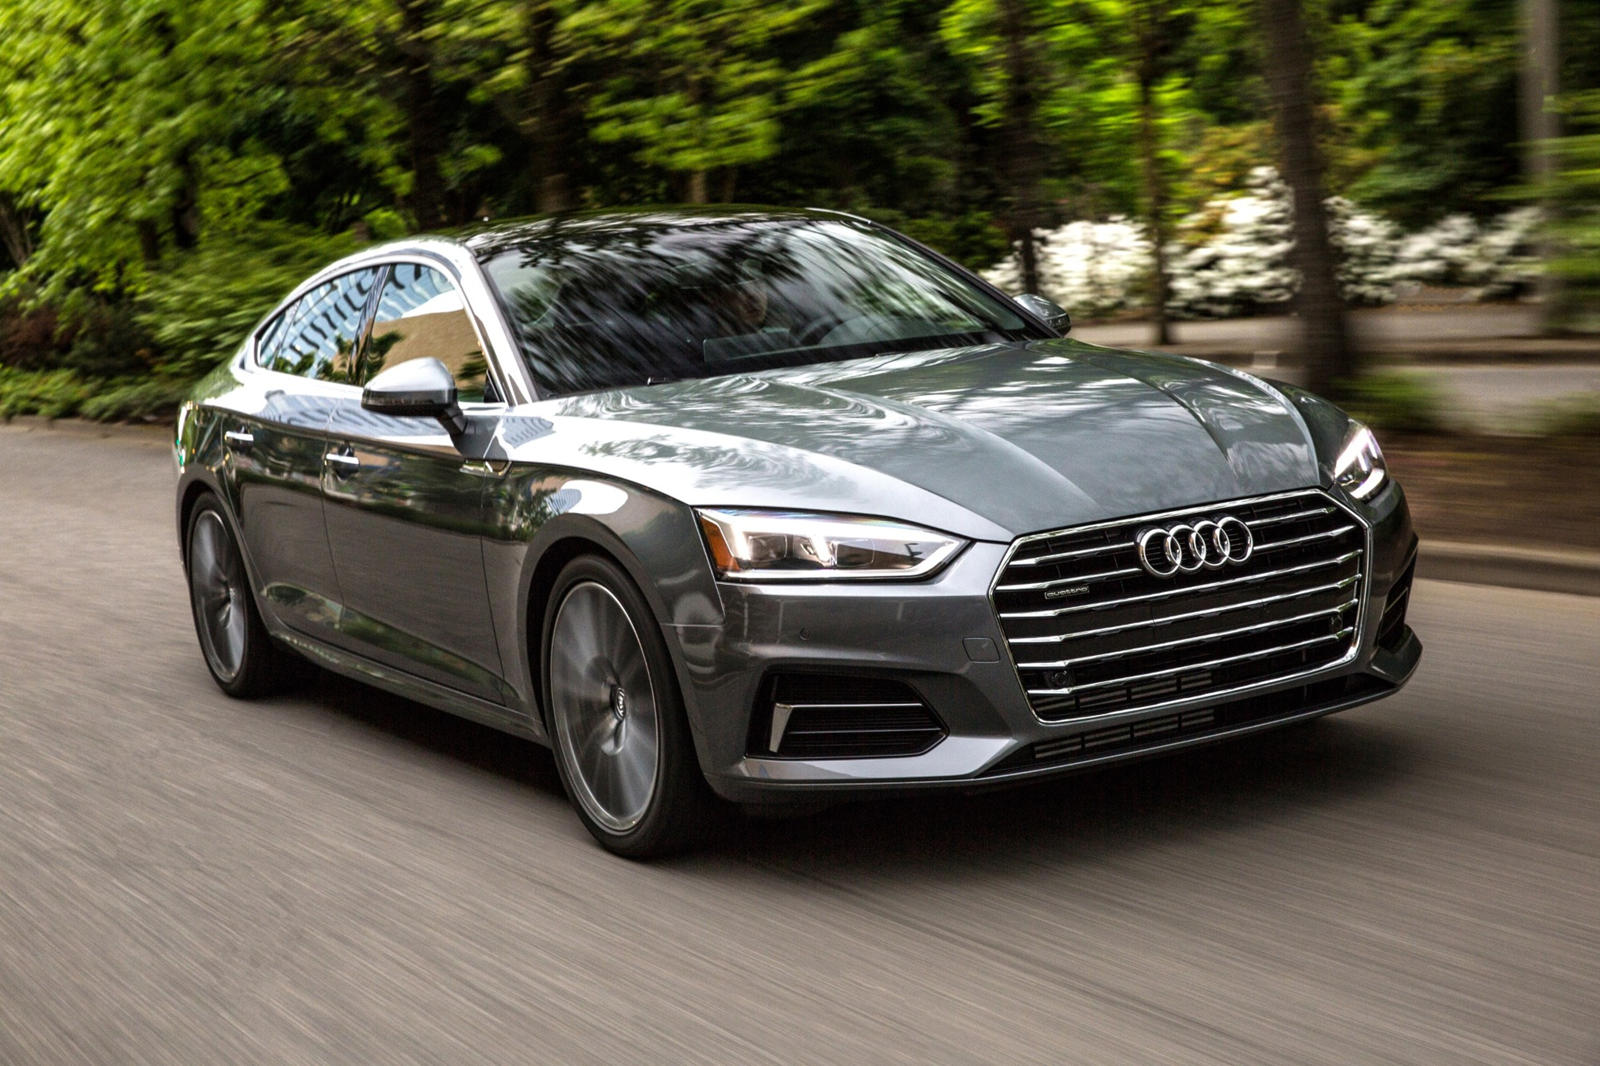 2019 Audi A5 Sportback: Review, Trims, Specs, Price, New Interior Features,  Exterior Design, and Specifications